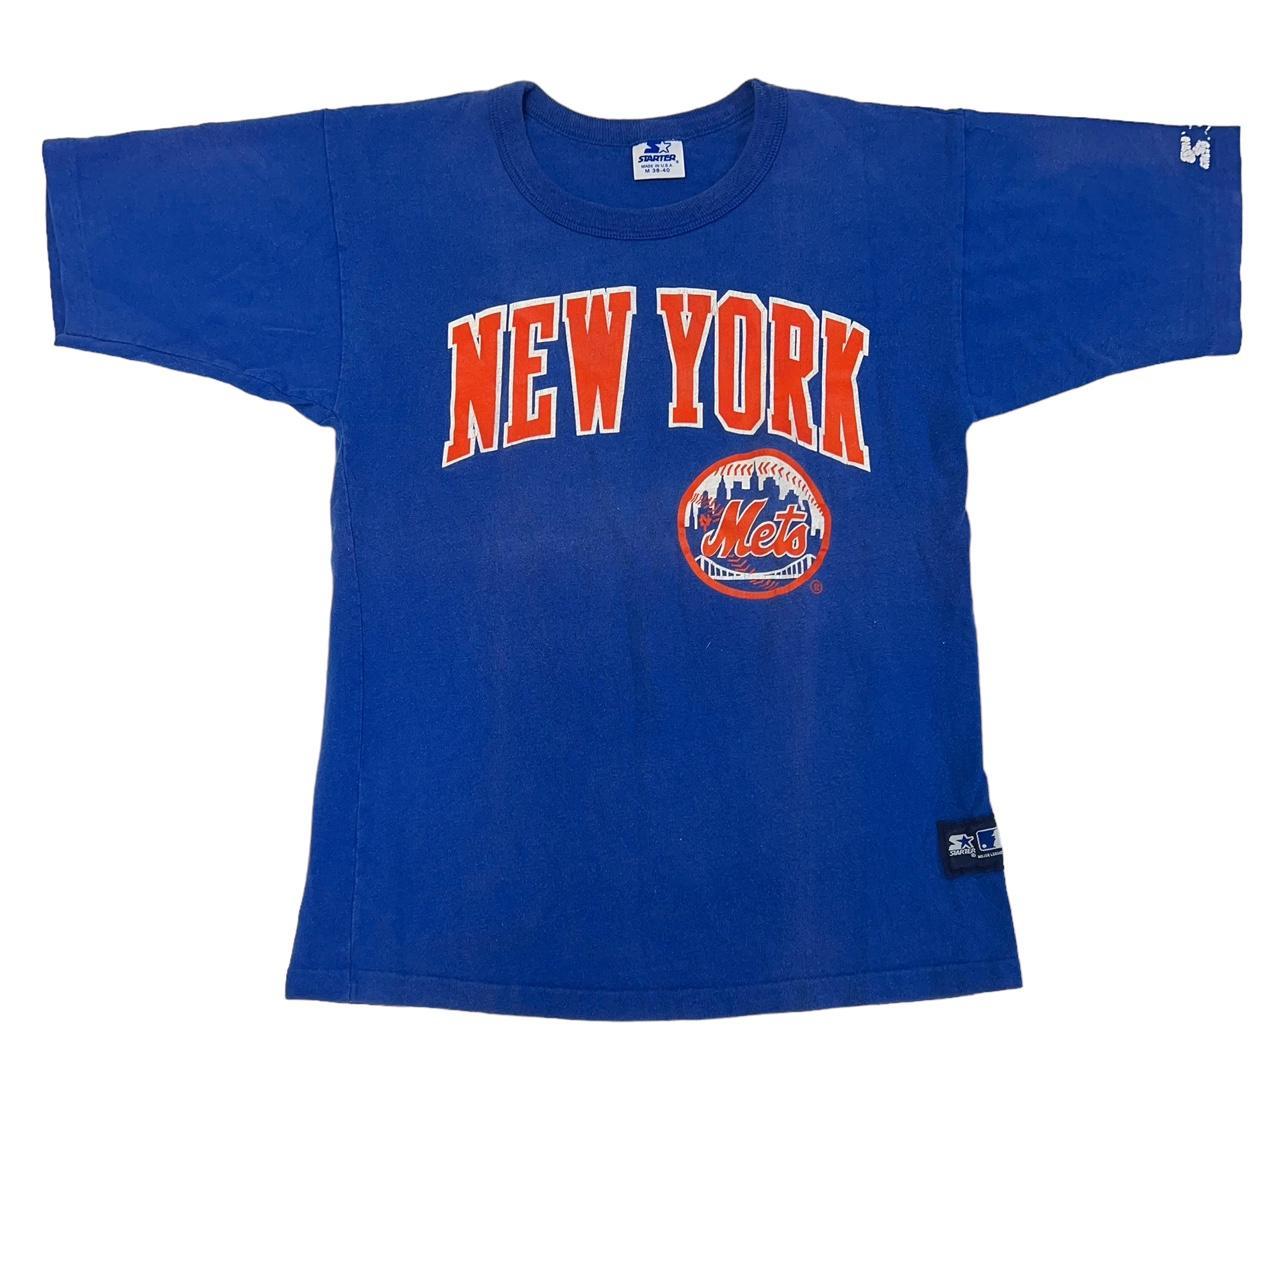 Size M New York Mets MLB Jerseys for sale